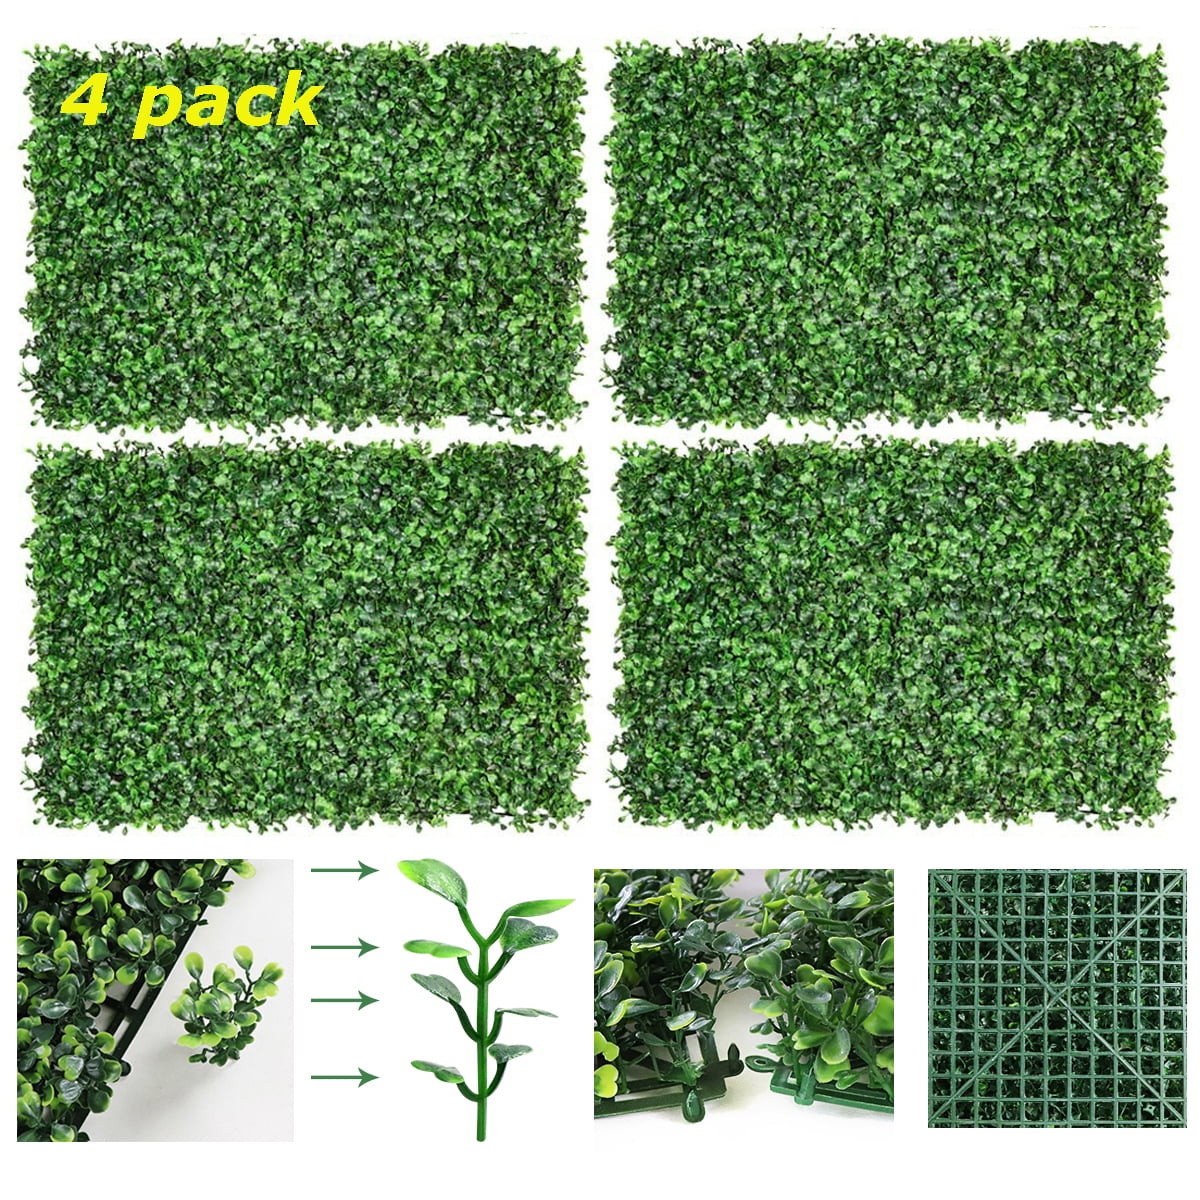 Coolmade 4 Pack Artificial Boxwood Panels Topiary Hedge Plants